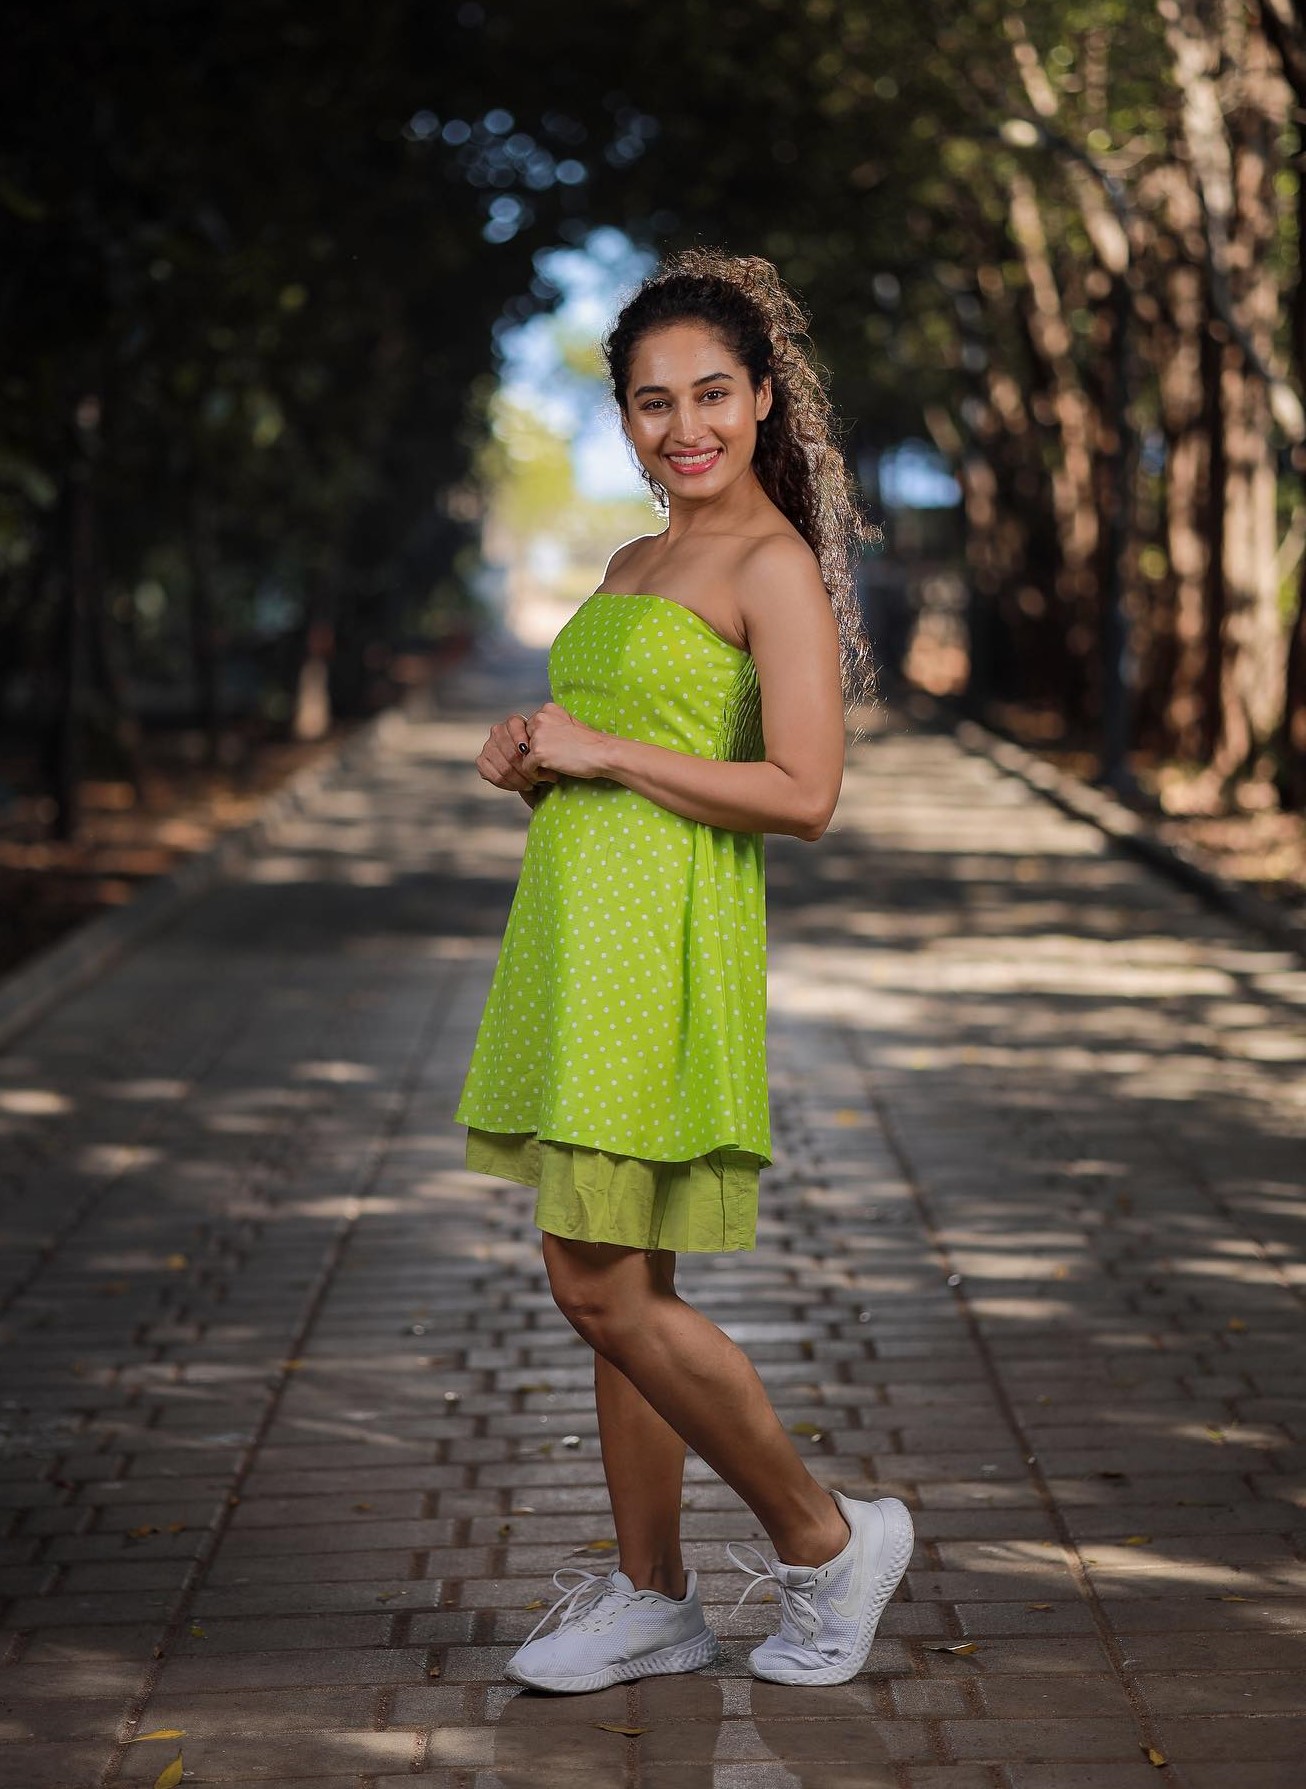 Pooja Ramachandran Refreshing Look In Green Off-Shoulder Short Dress Sports With White Sneakers Mesmerizing Traditional & Western Outfits